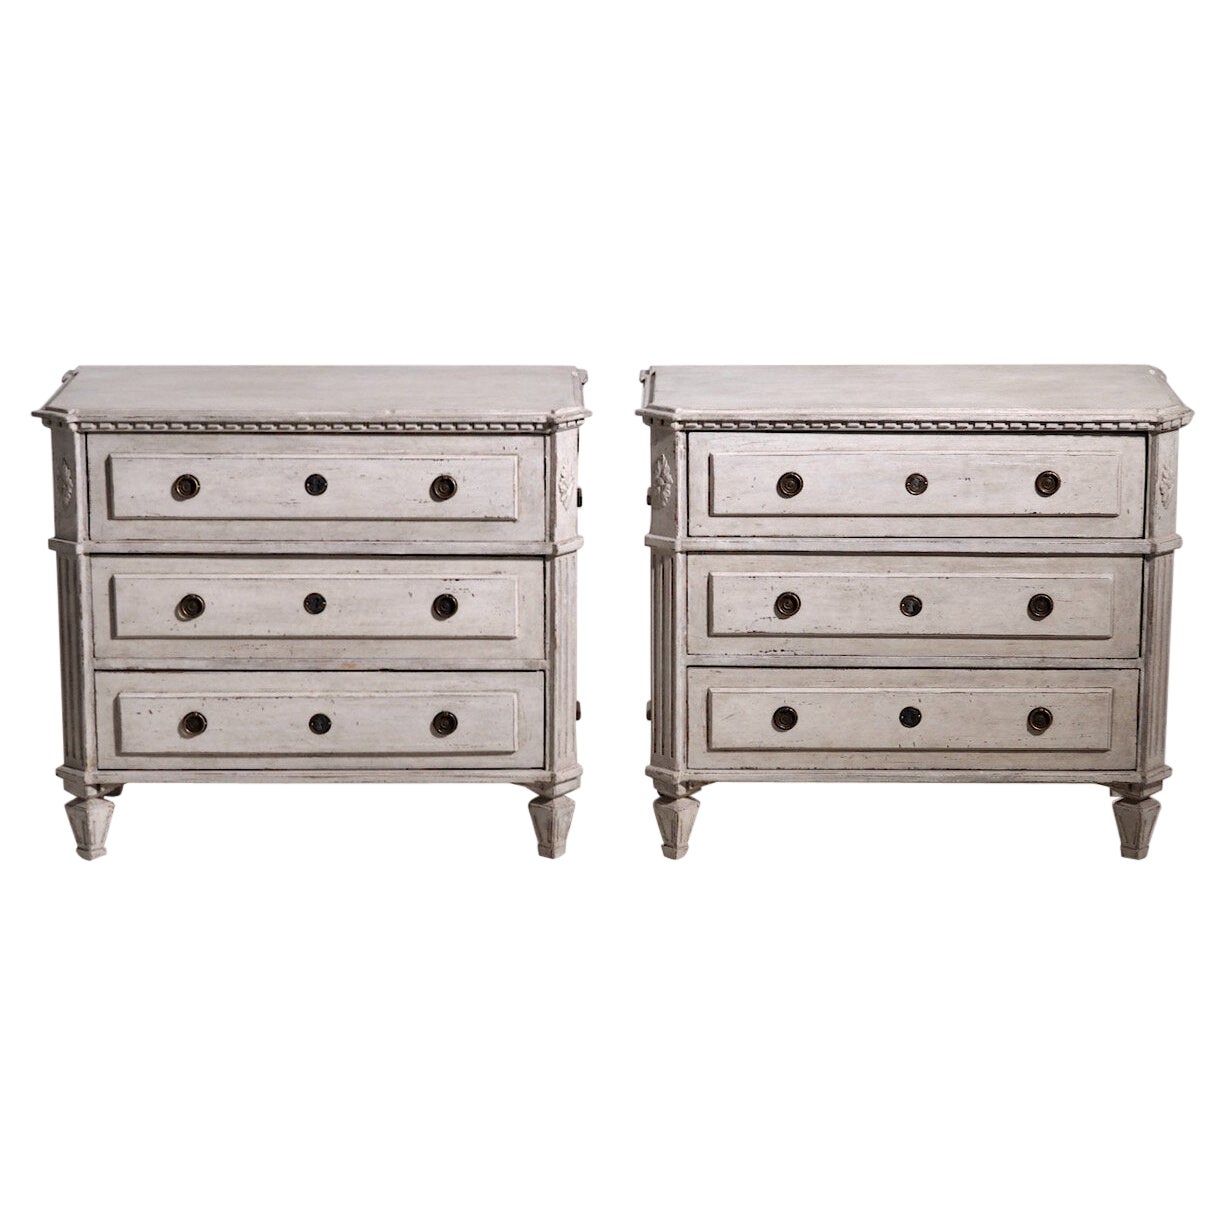 19th c. Pair of Swedish Late Gustavian Period Painted Bedside Commodes